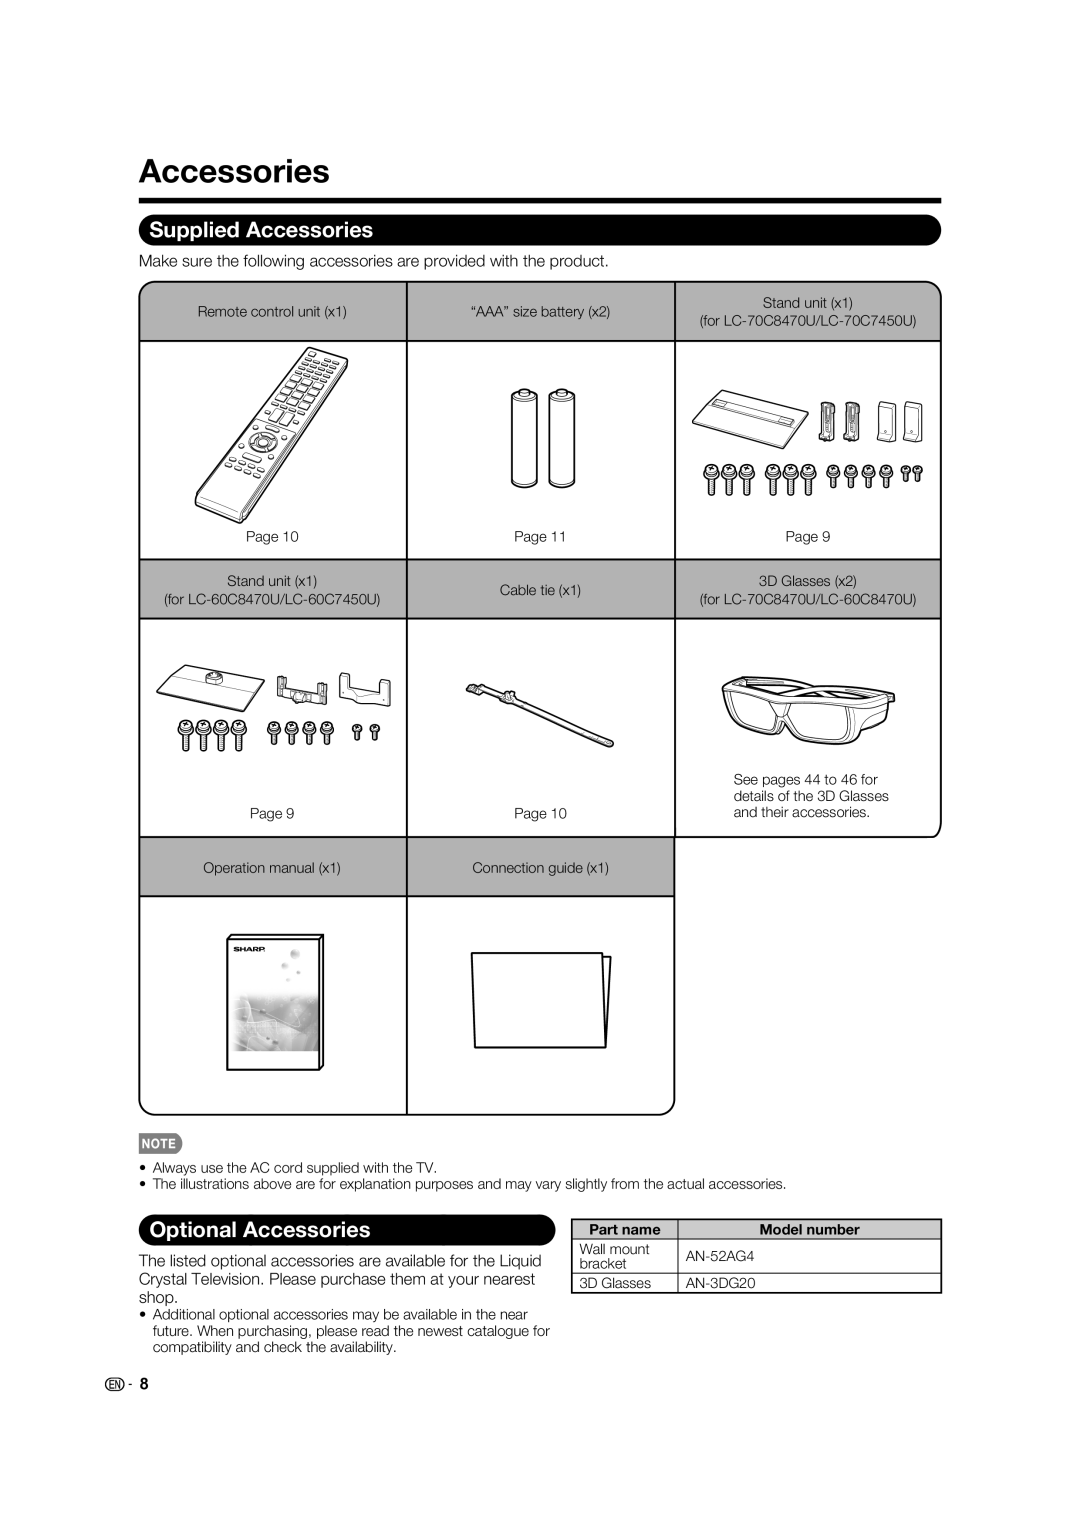 Sharp LC-60C7450U, LC-70C7450U, LC-70C8470U, LC-60C8470U operation manual Supplied Accessories, Optional Accessories 